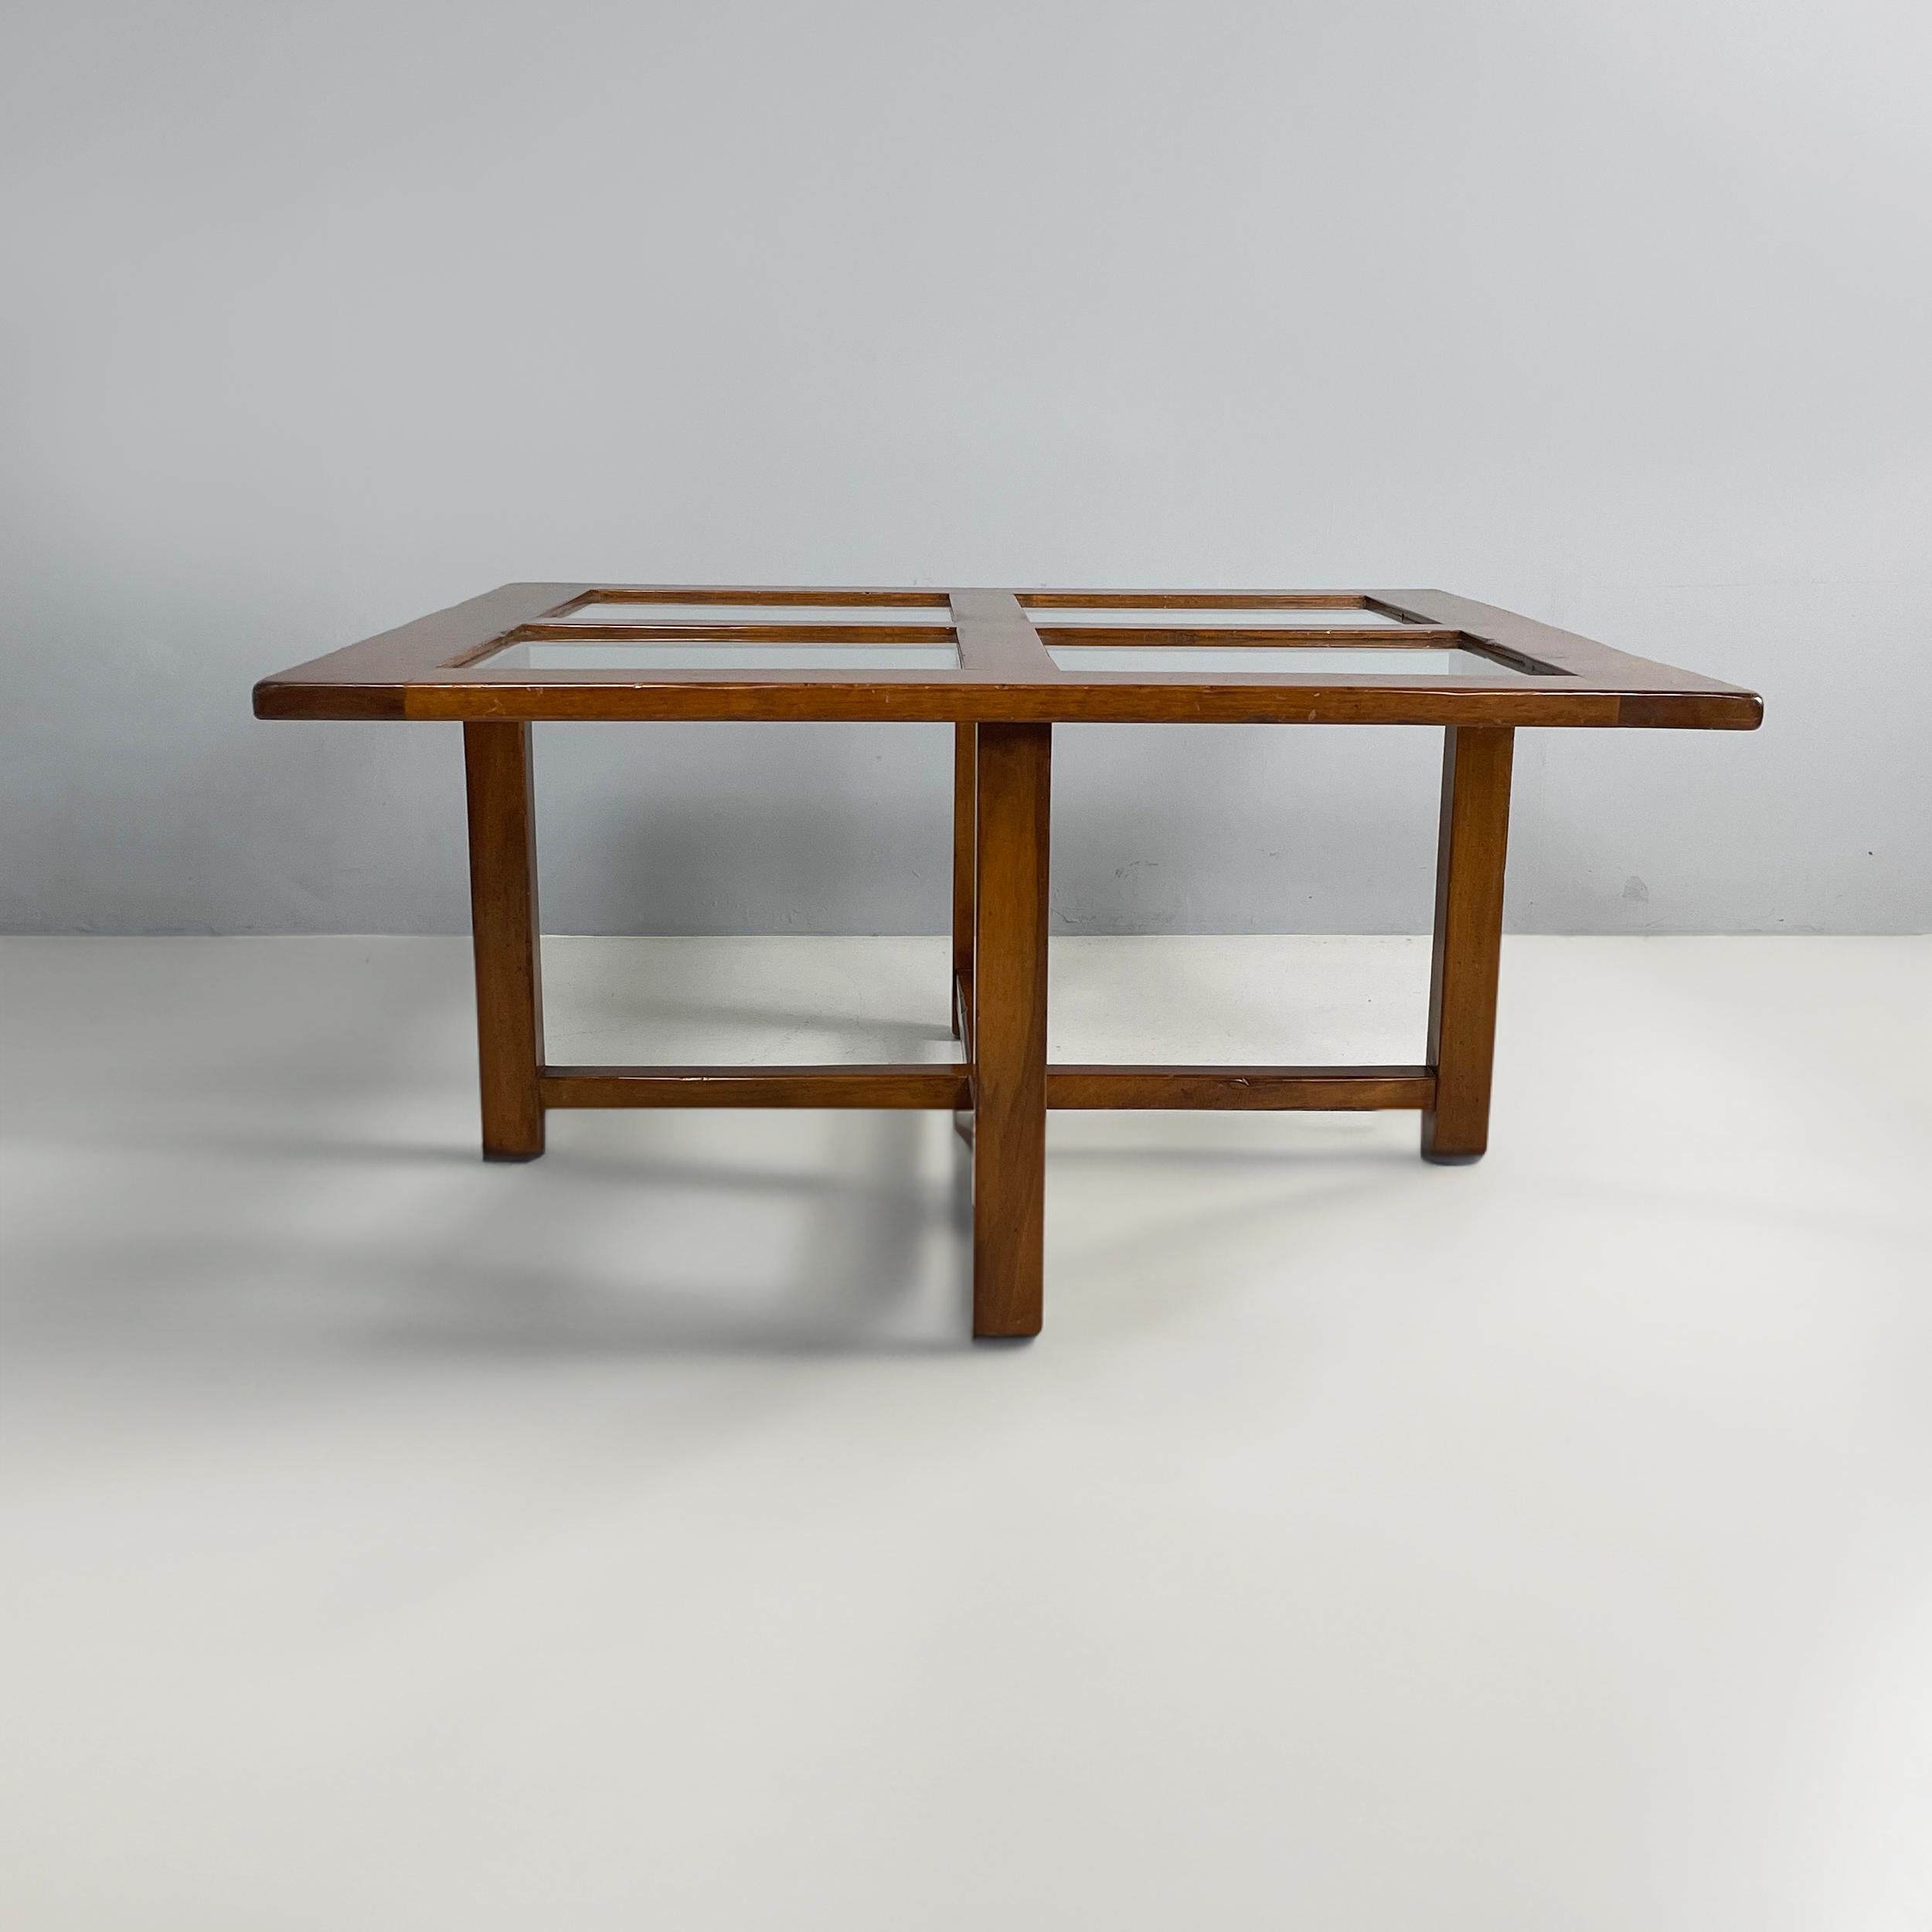 Italian modern Square coffee table in wood and glass, 1980s
Coffee table with square top with rounded corners, which is divided into 4 glass squares by wooden slats. The cross-shape base is made of wooden slats.
1980 approx.
Good conditions. Light